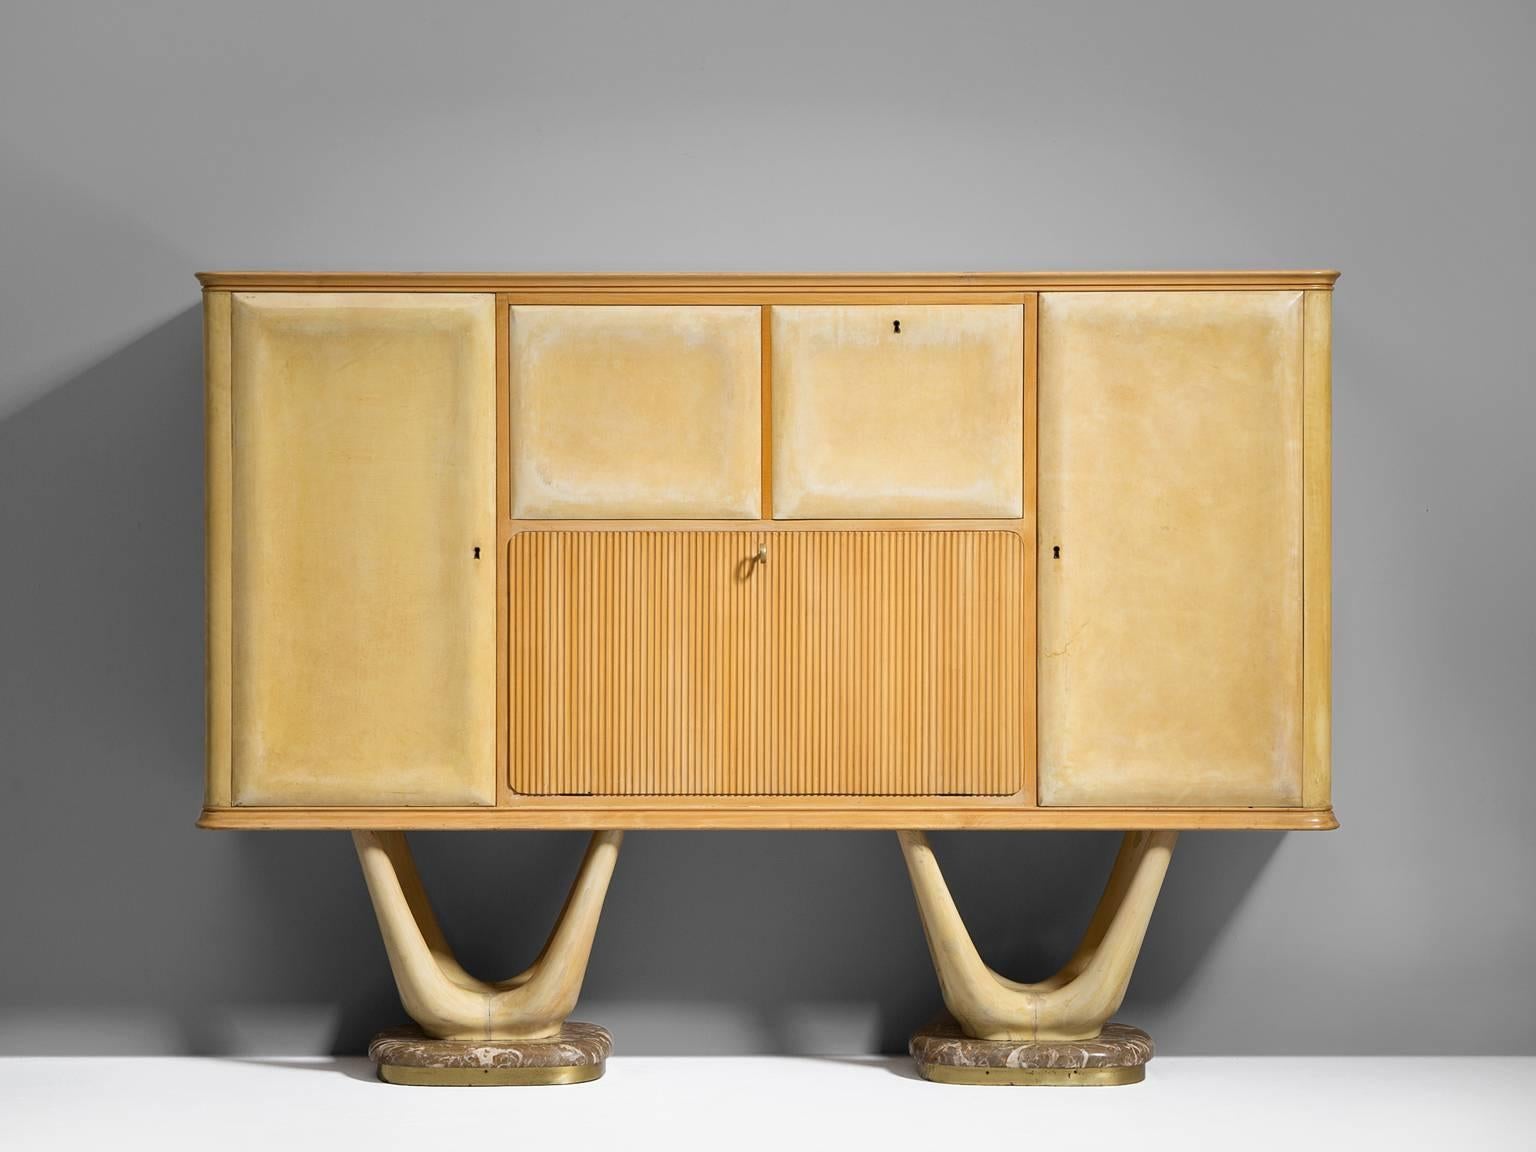 Sideboard including dry bar designed by Vittorio Dassi and made by Dassi e Figli, Italy 1950s. 

This cabinet, designed bt Vitorio Dassi (1893-1973) has a light maple wooden construction with a colored glass top. The base of this credenza is made